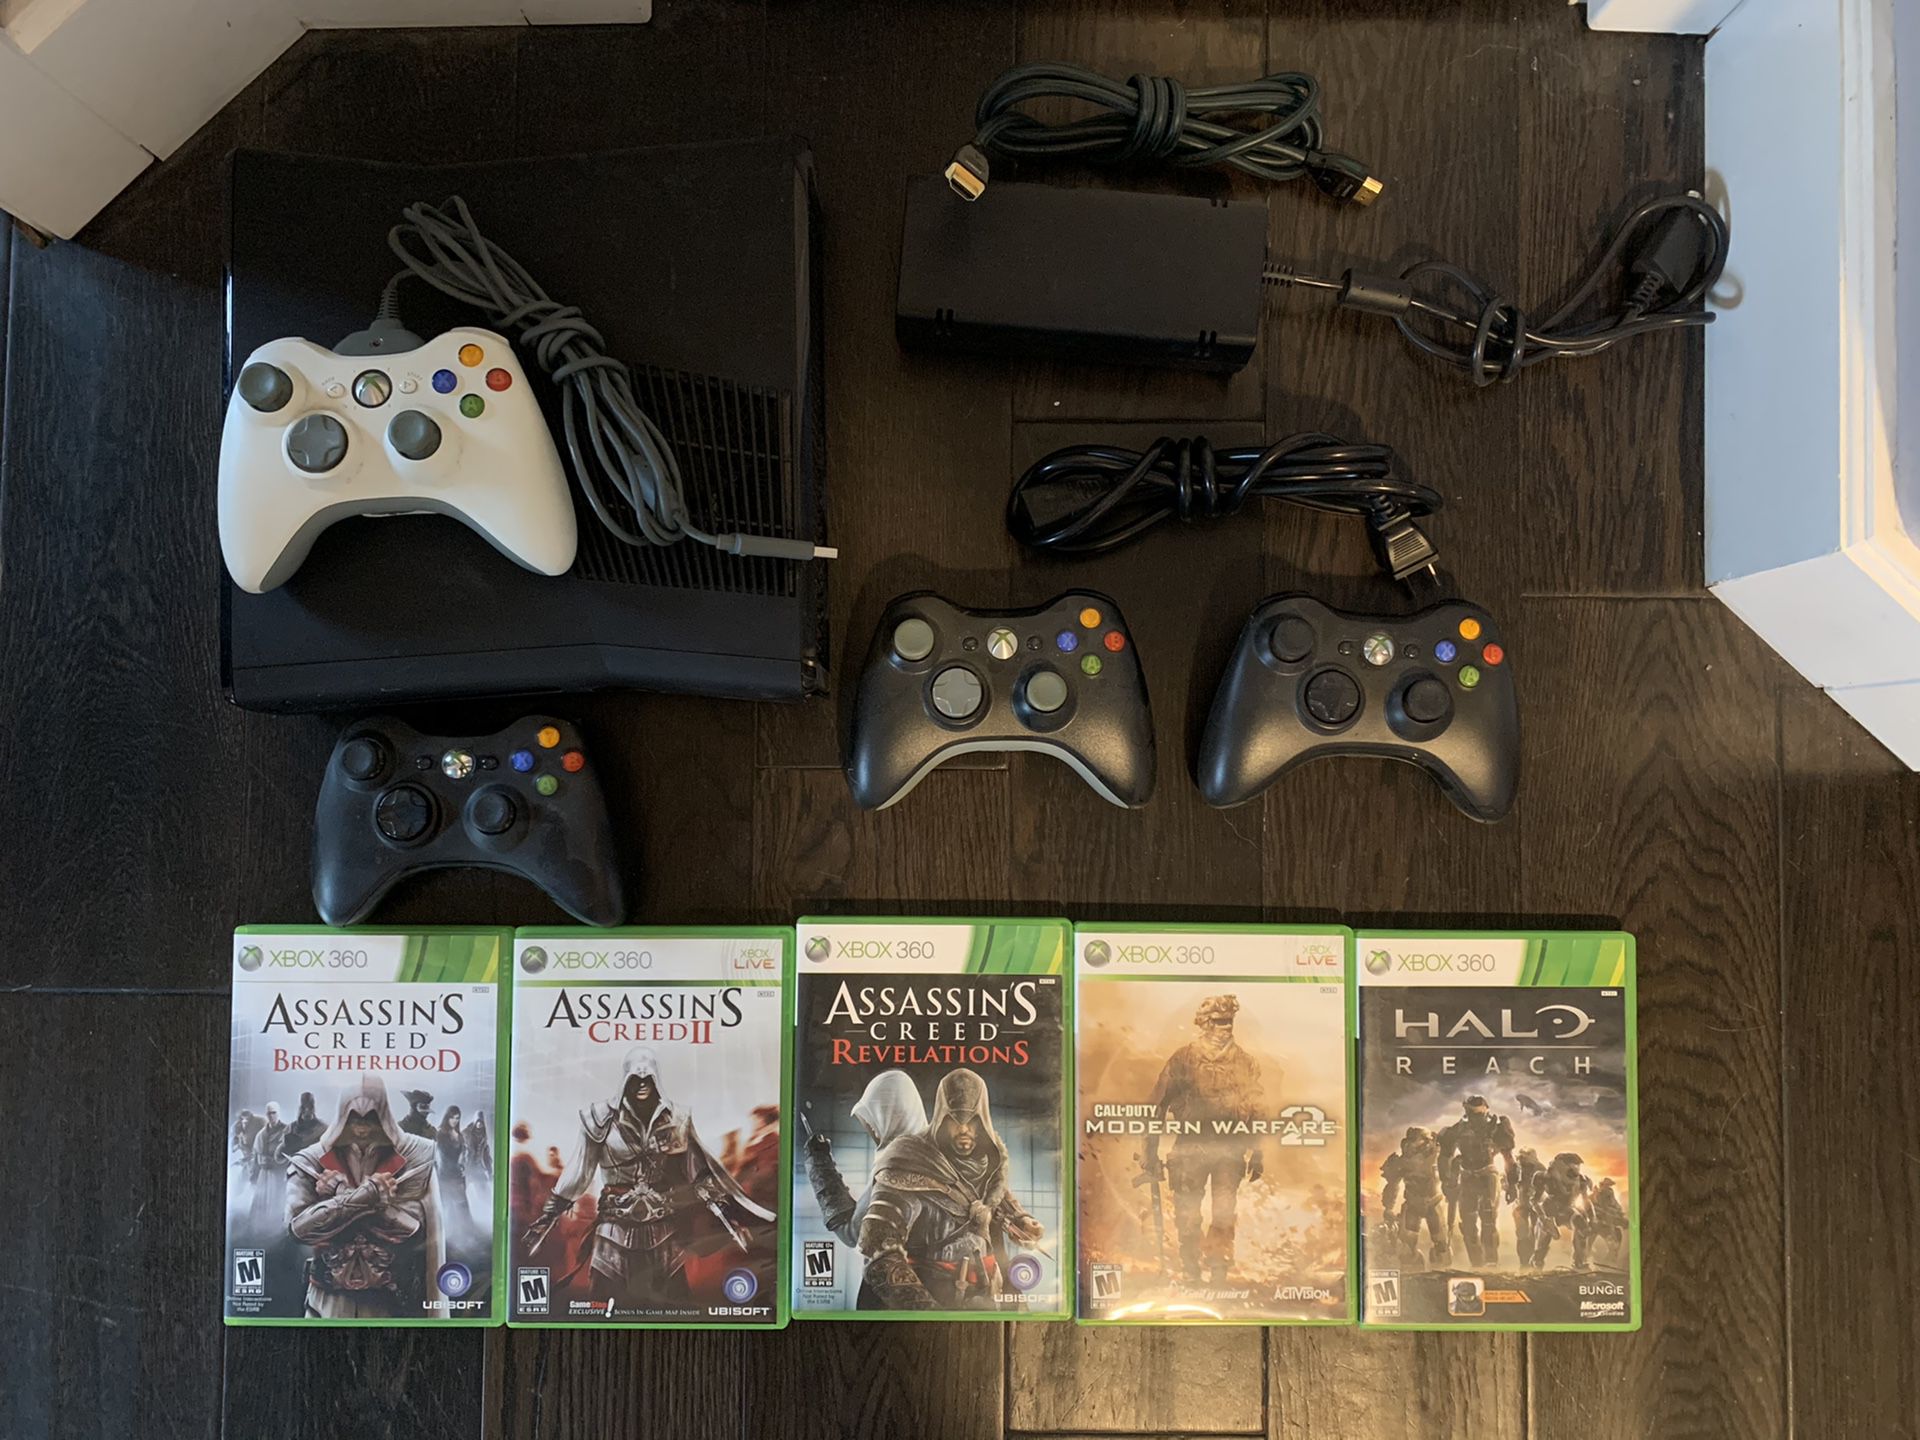 XBox 360, + controllers and games